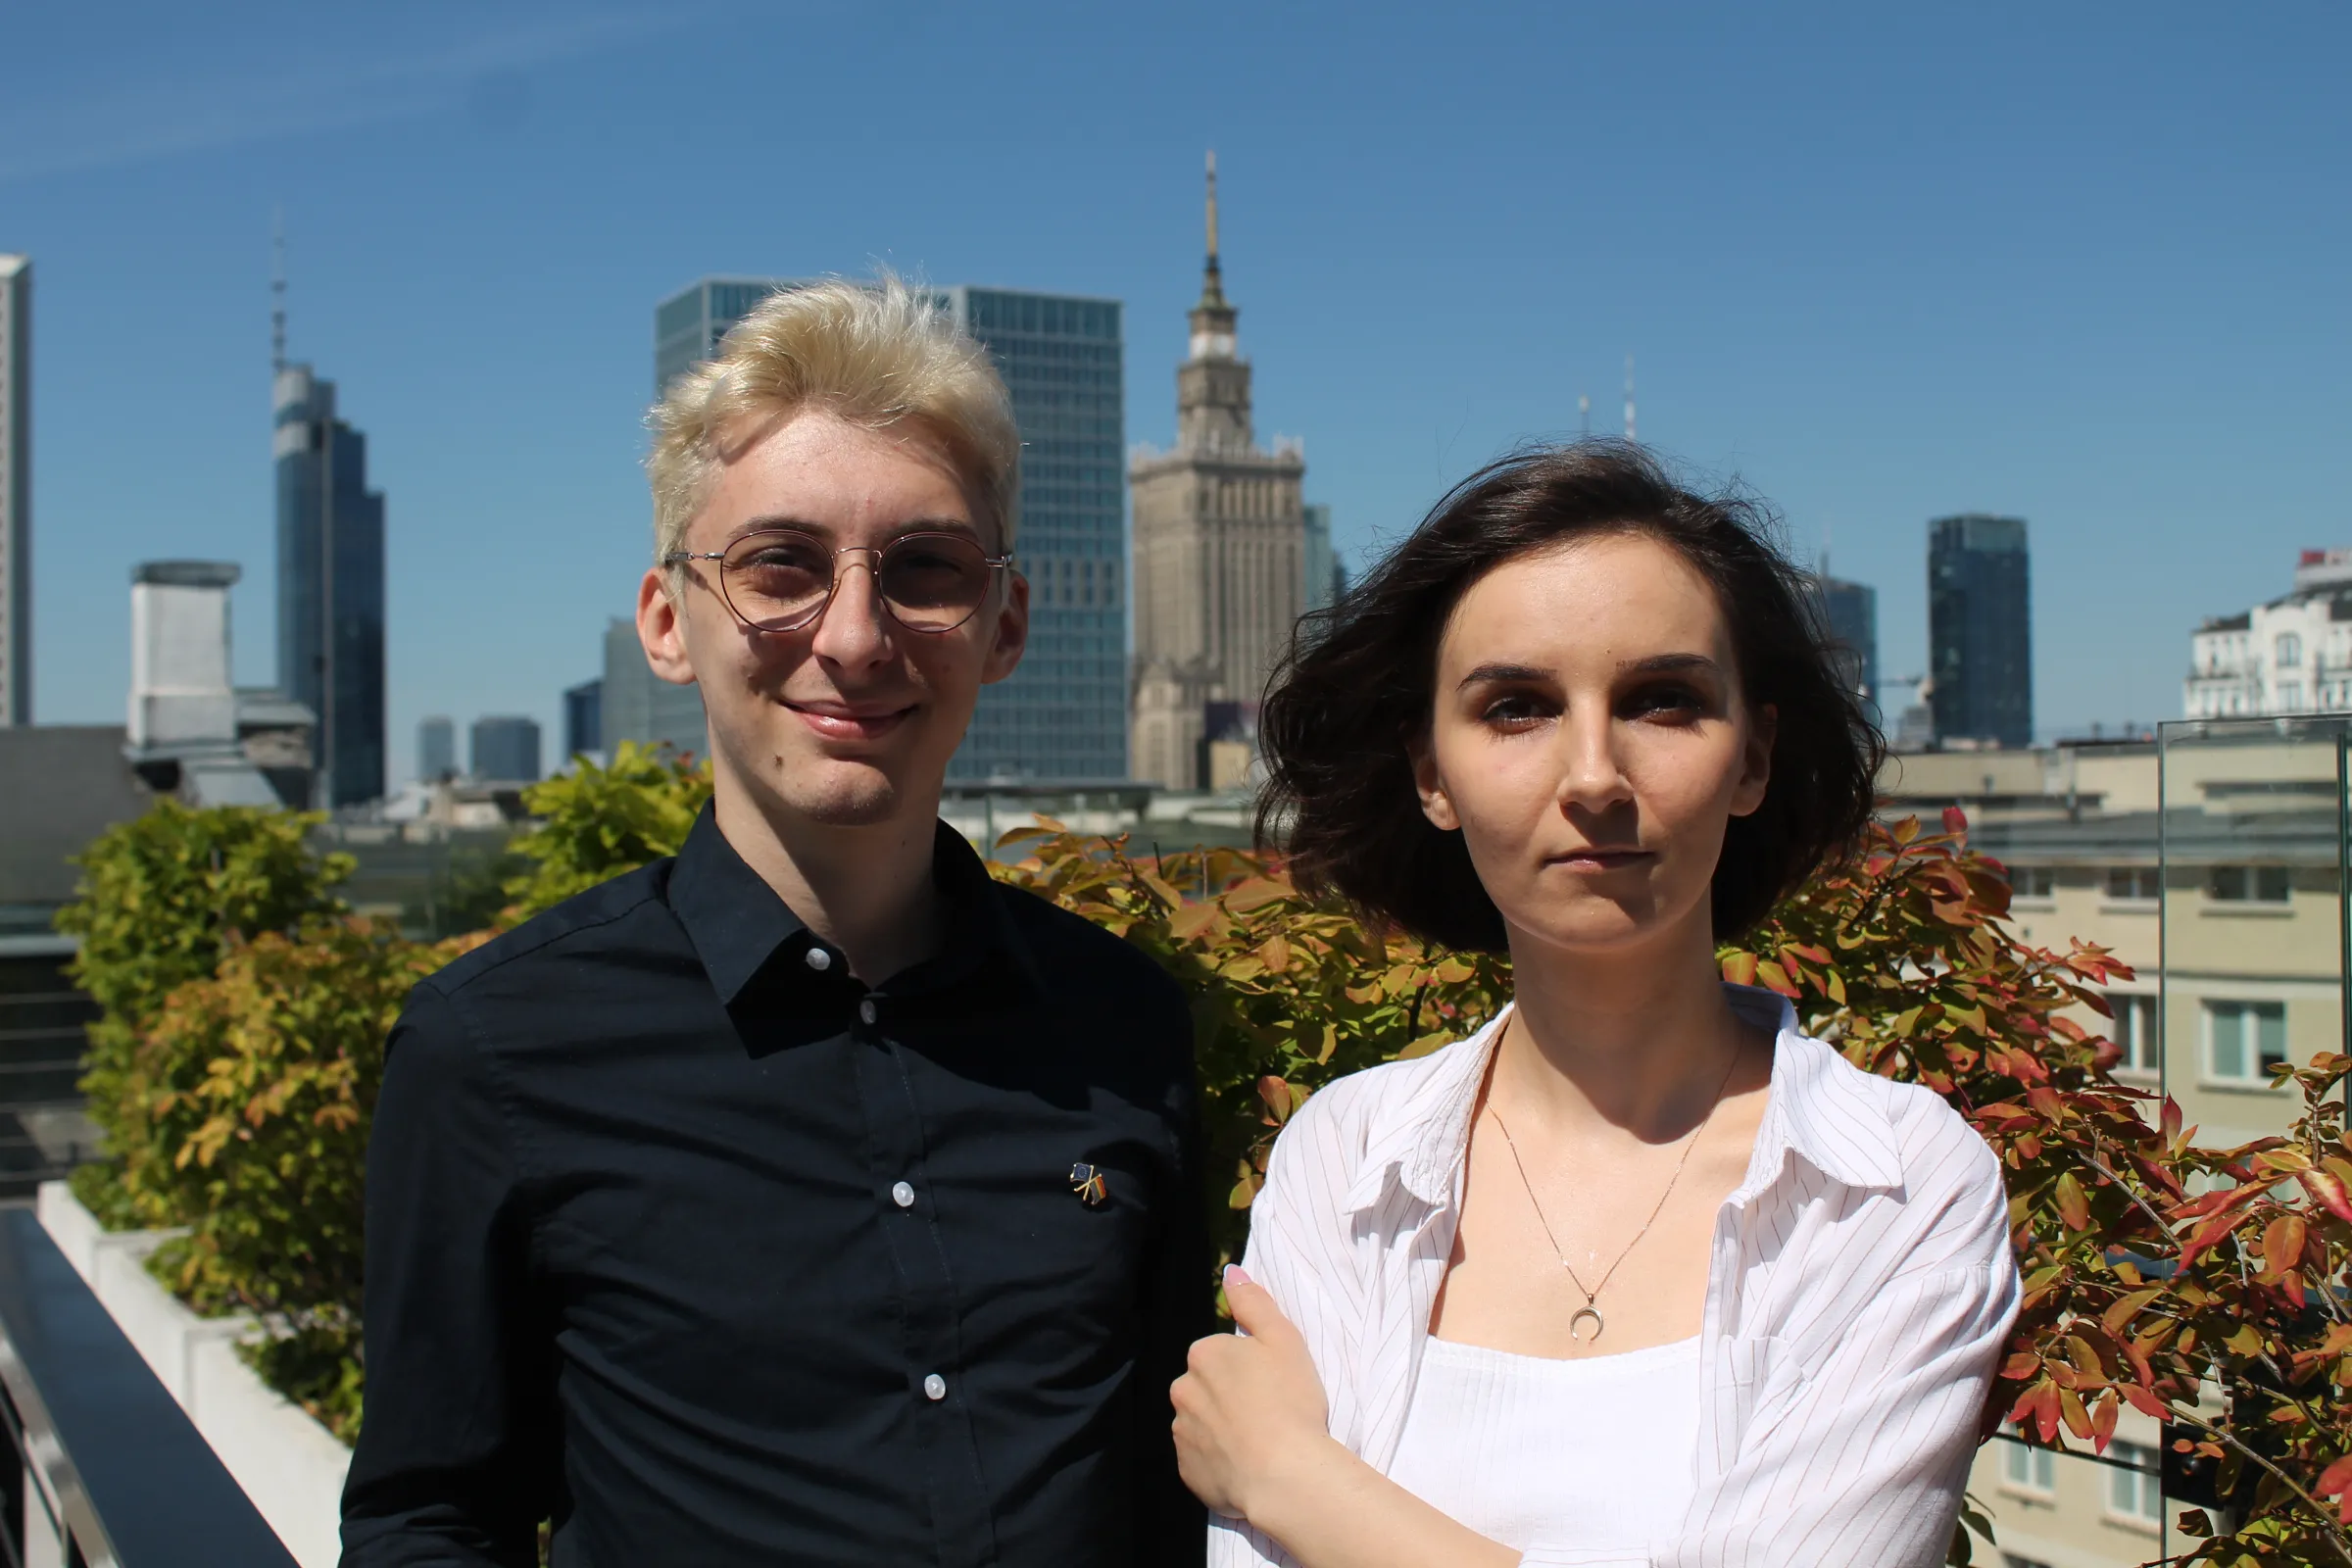 Dominik Kuc (left), founder of the first ranking of LGBTQ+ inclusion in Polish schools, and his colleague in the ranking project Agata Zapora (right) pose during an interview in Poland’s capital Warsaw on June 25, 2022